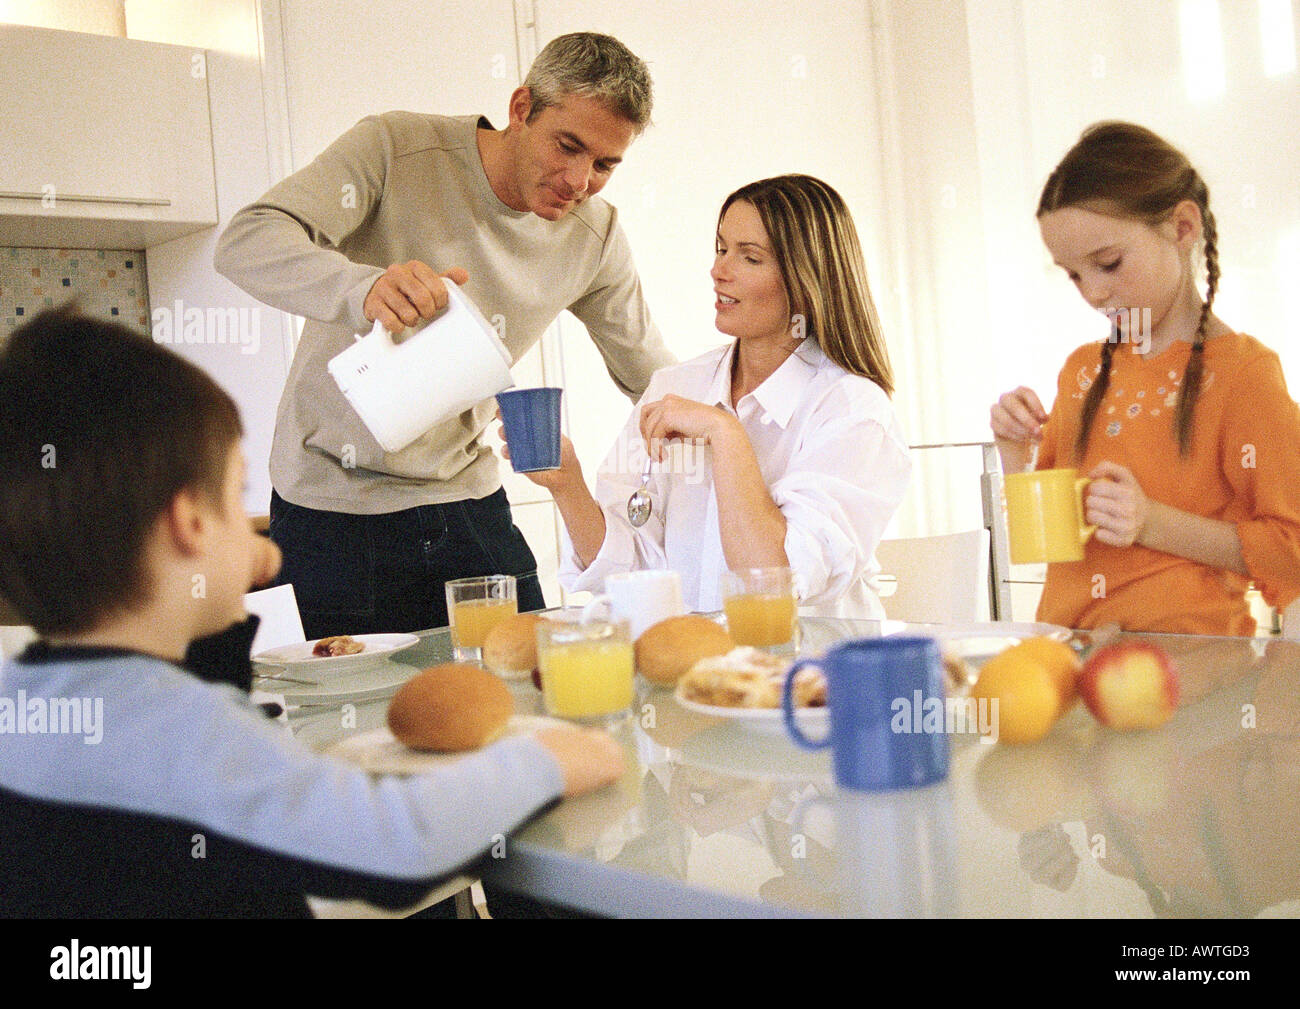 Family eating breakfast together, father pouring drinks Stock Photo